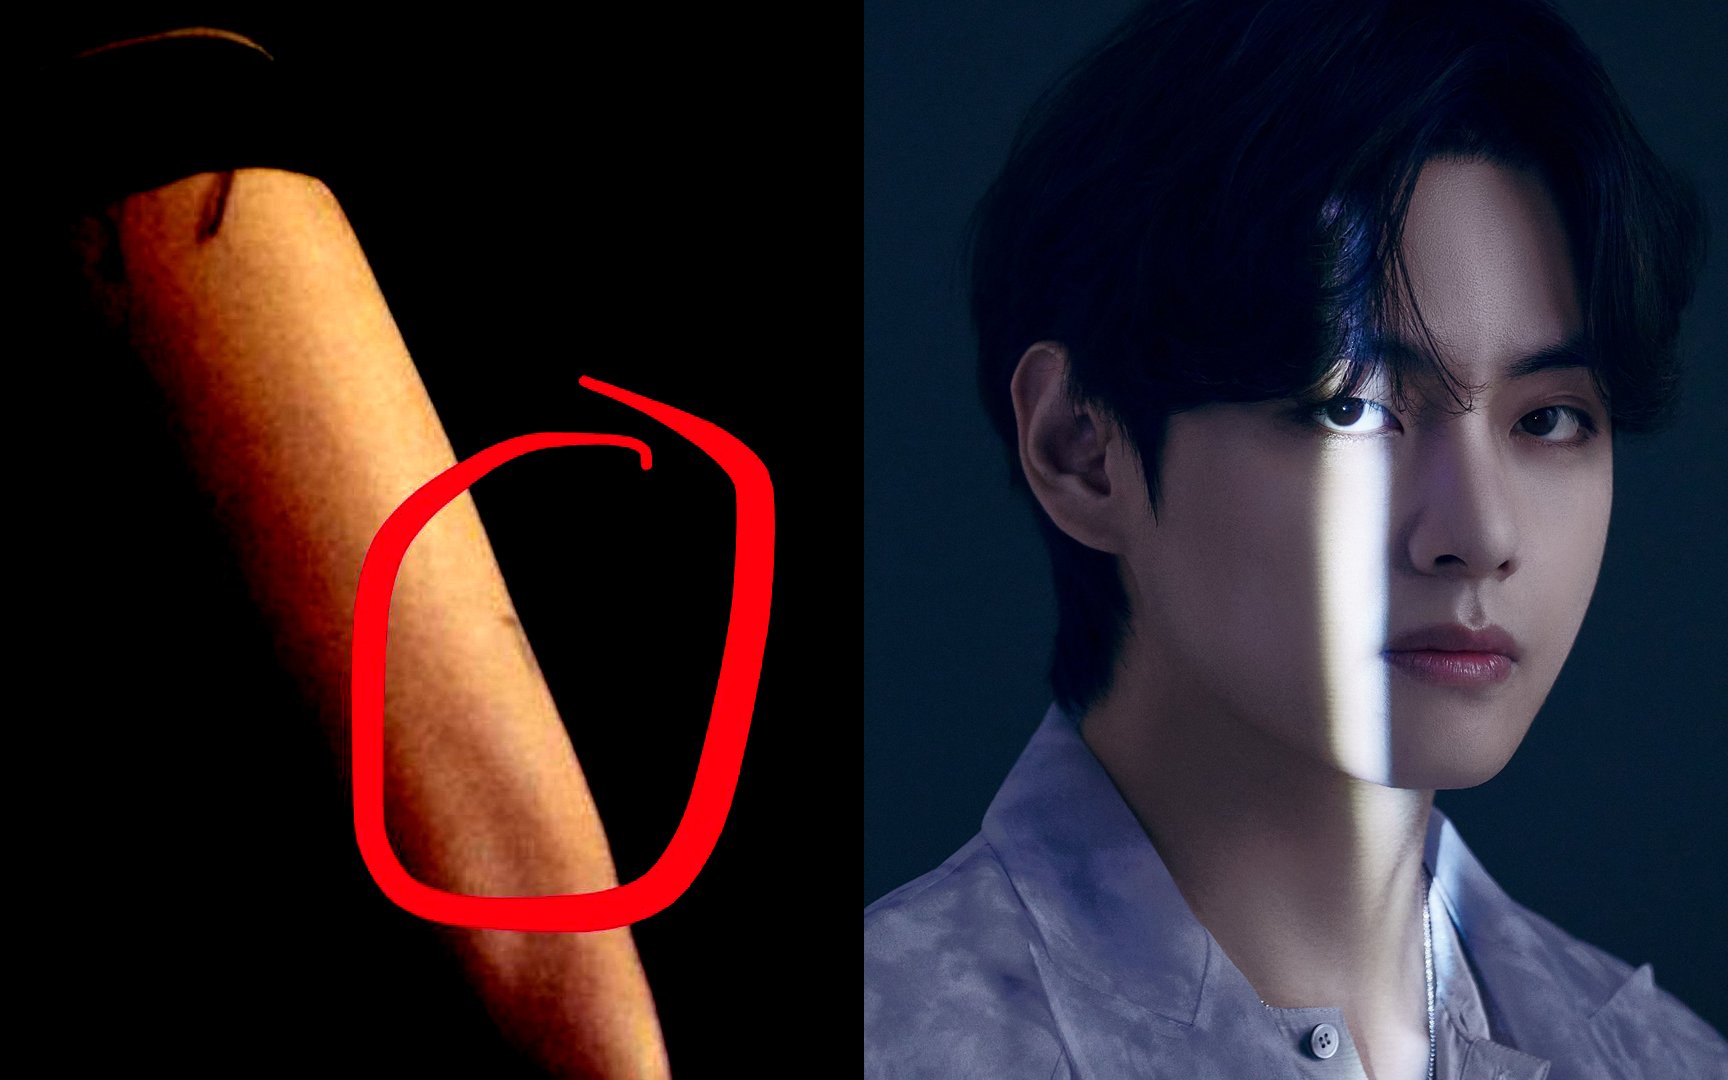 This is where V really got his friendship tattoo | allkpop